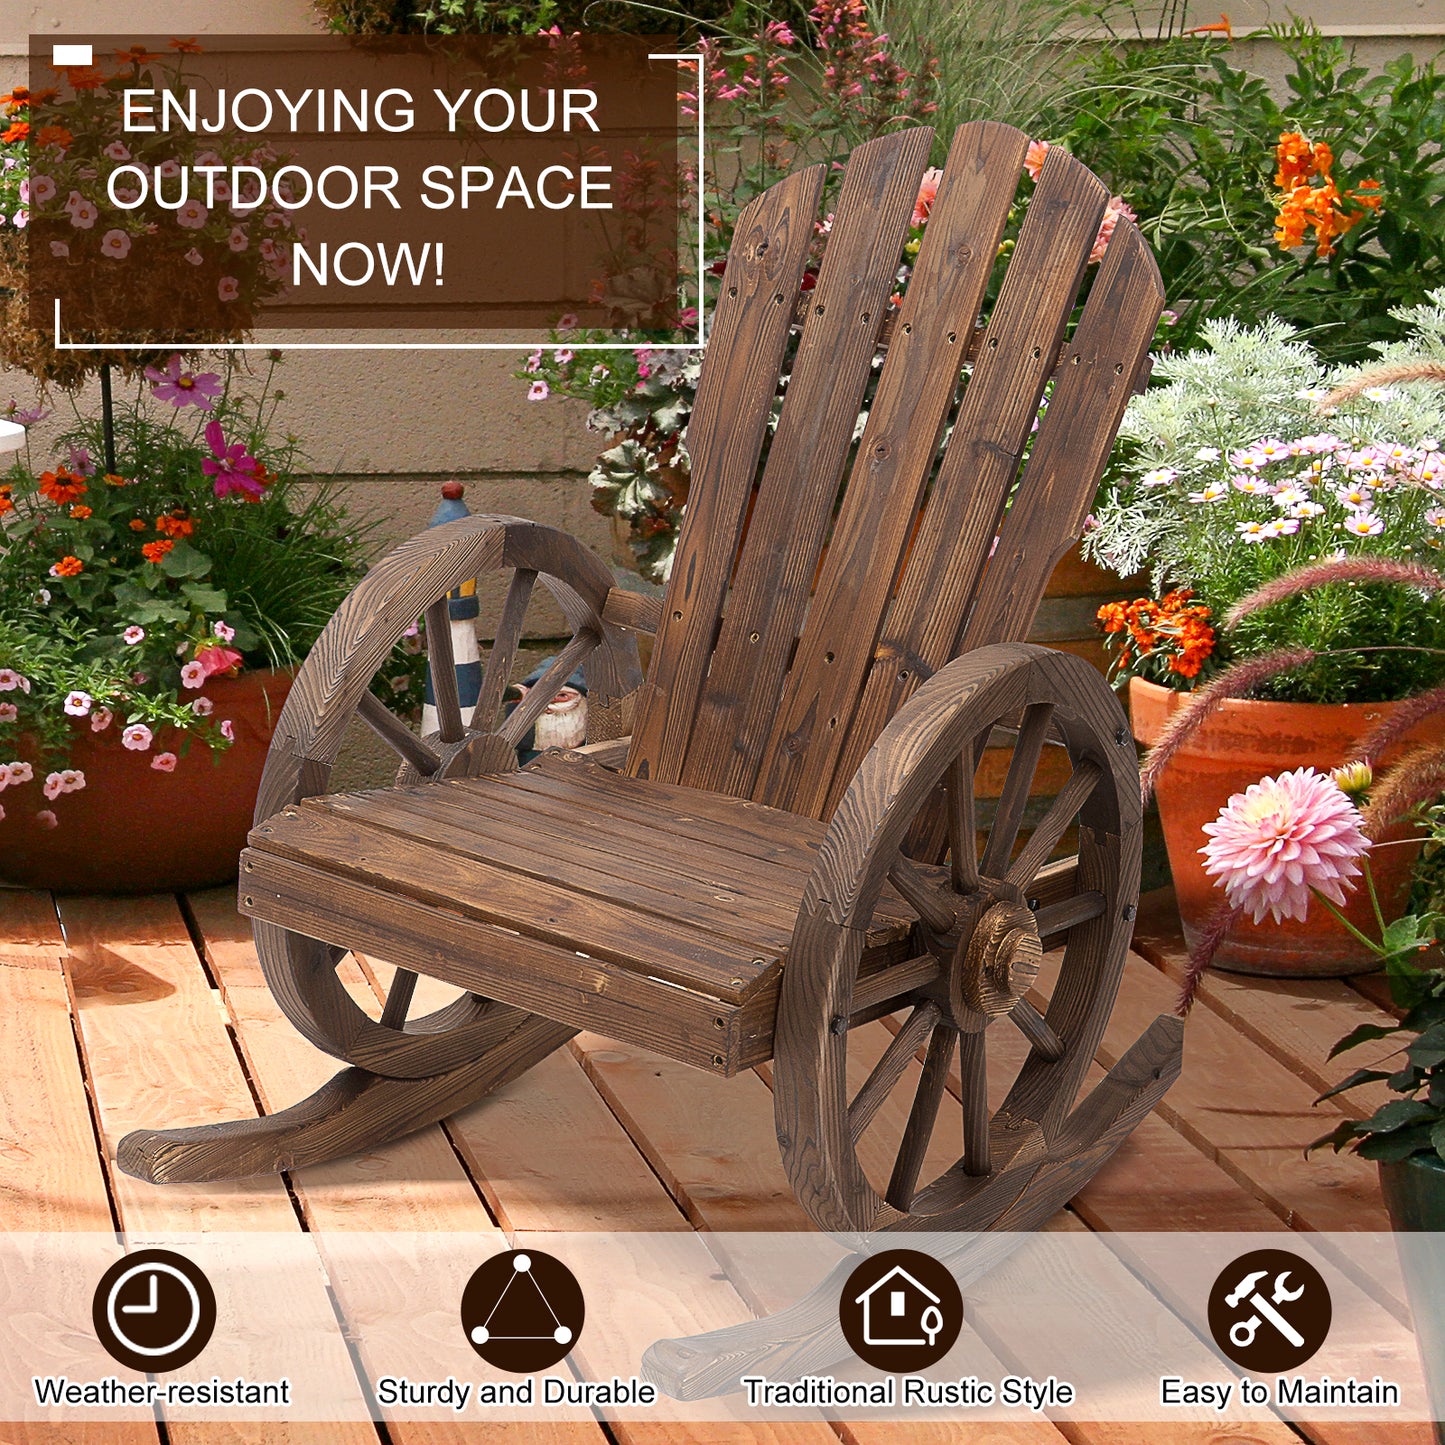 Outsunny Wooden Adirondack  Rocking Chair Reclining Armchair Outdoor Garden Furniture Patio Porch Rocker - Carbonized Wood Colour